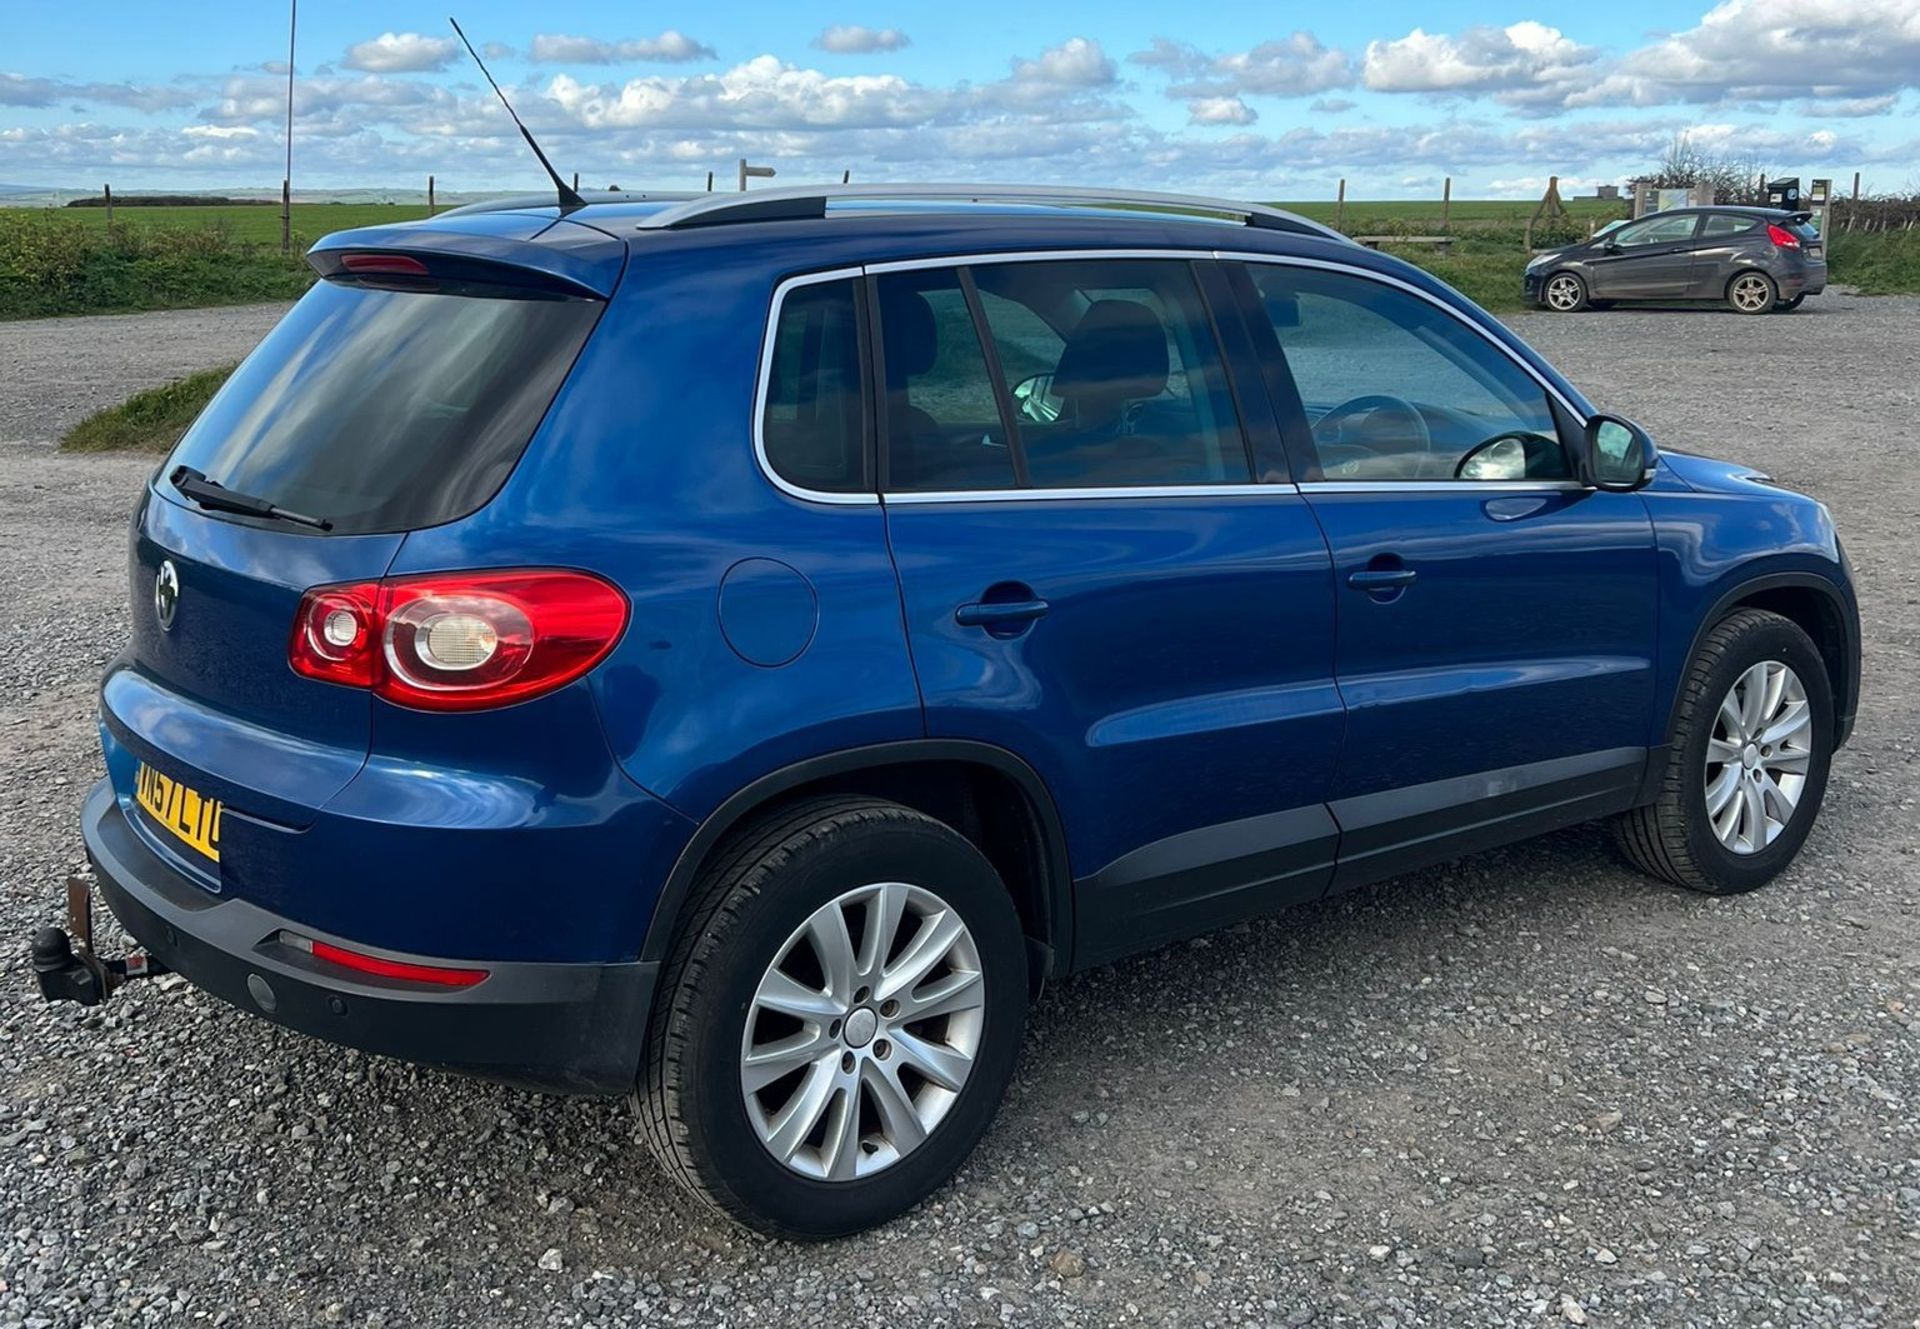 2008 Volkswagen Tiguan SE Tdi 140 - Sport pan roof with 12 months MOT - Offered at No Reserve - Image 6 of 16